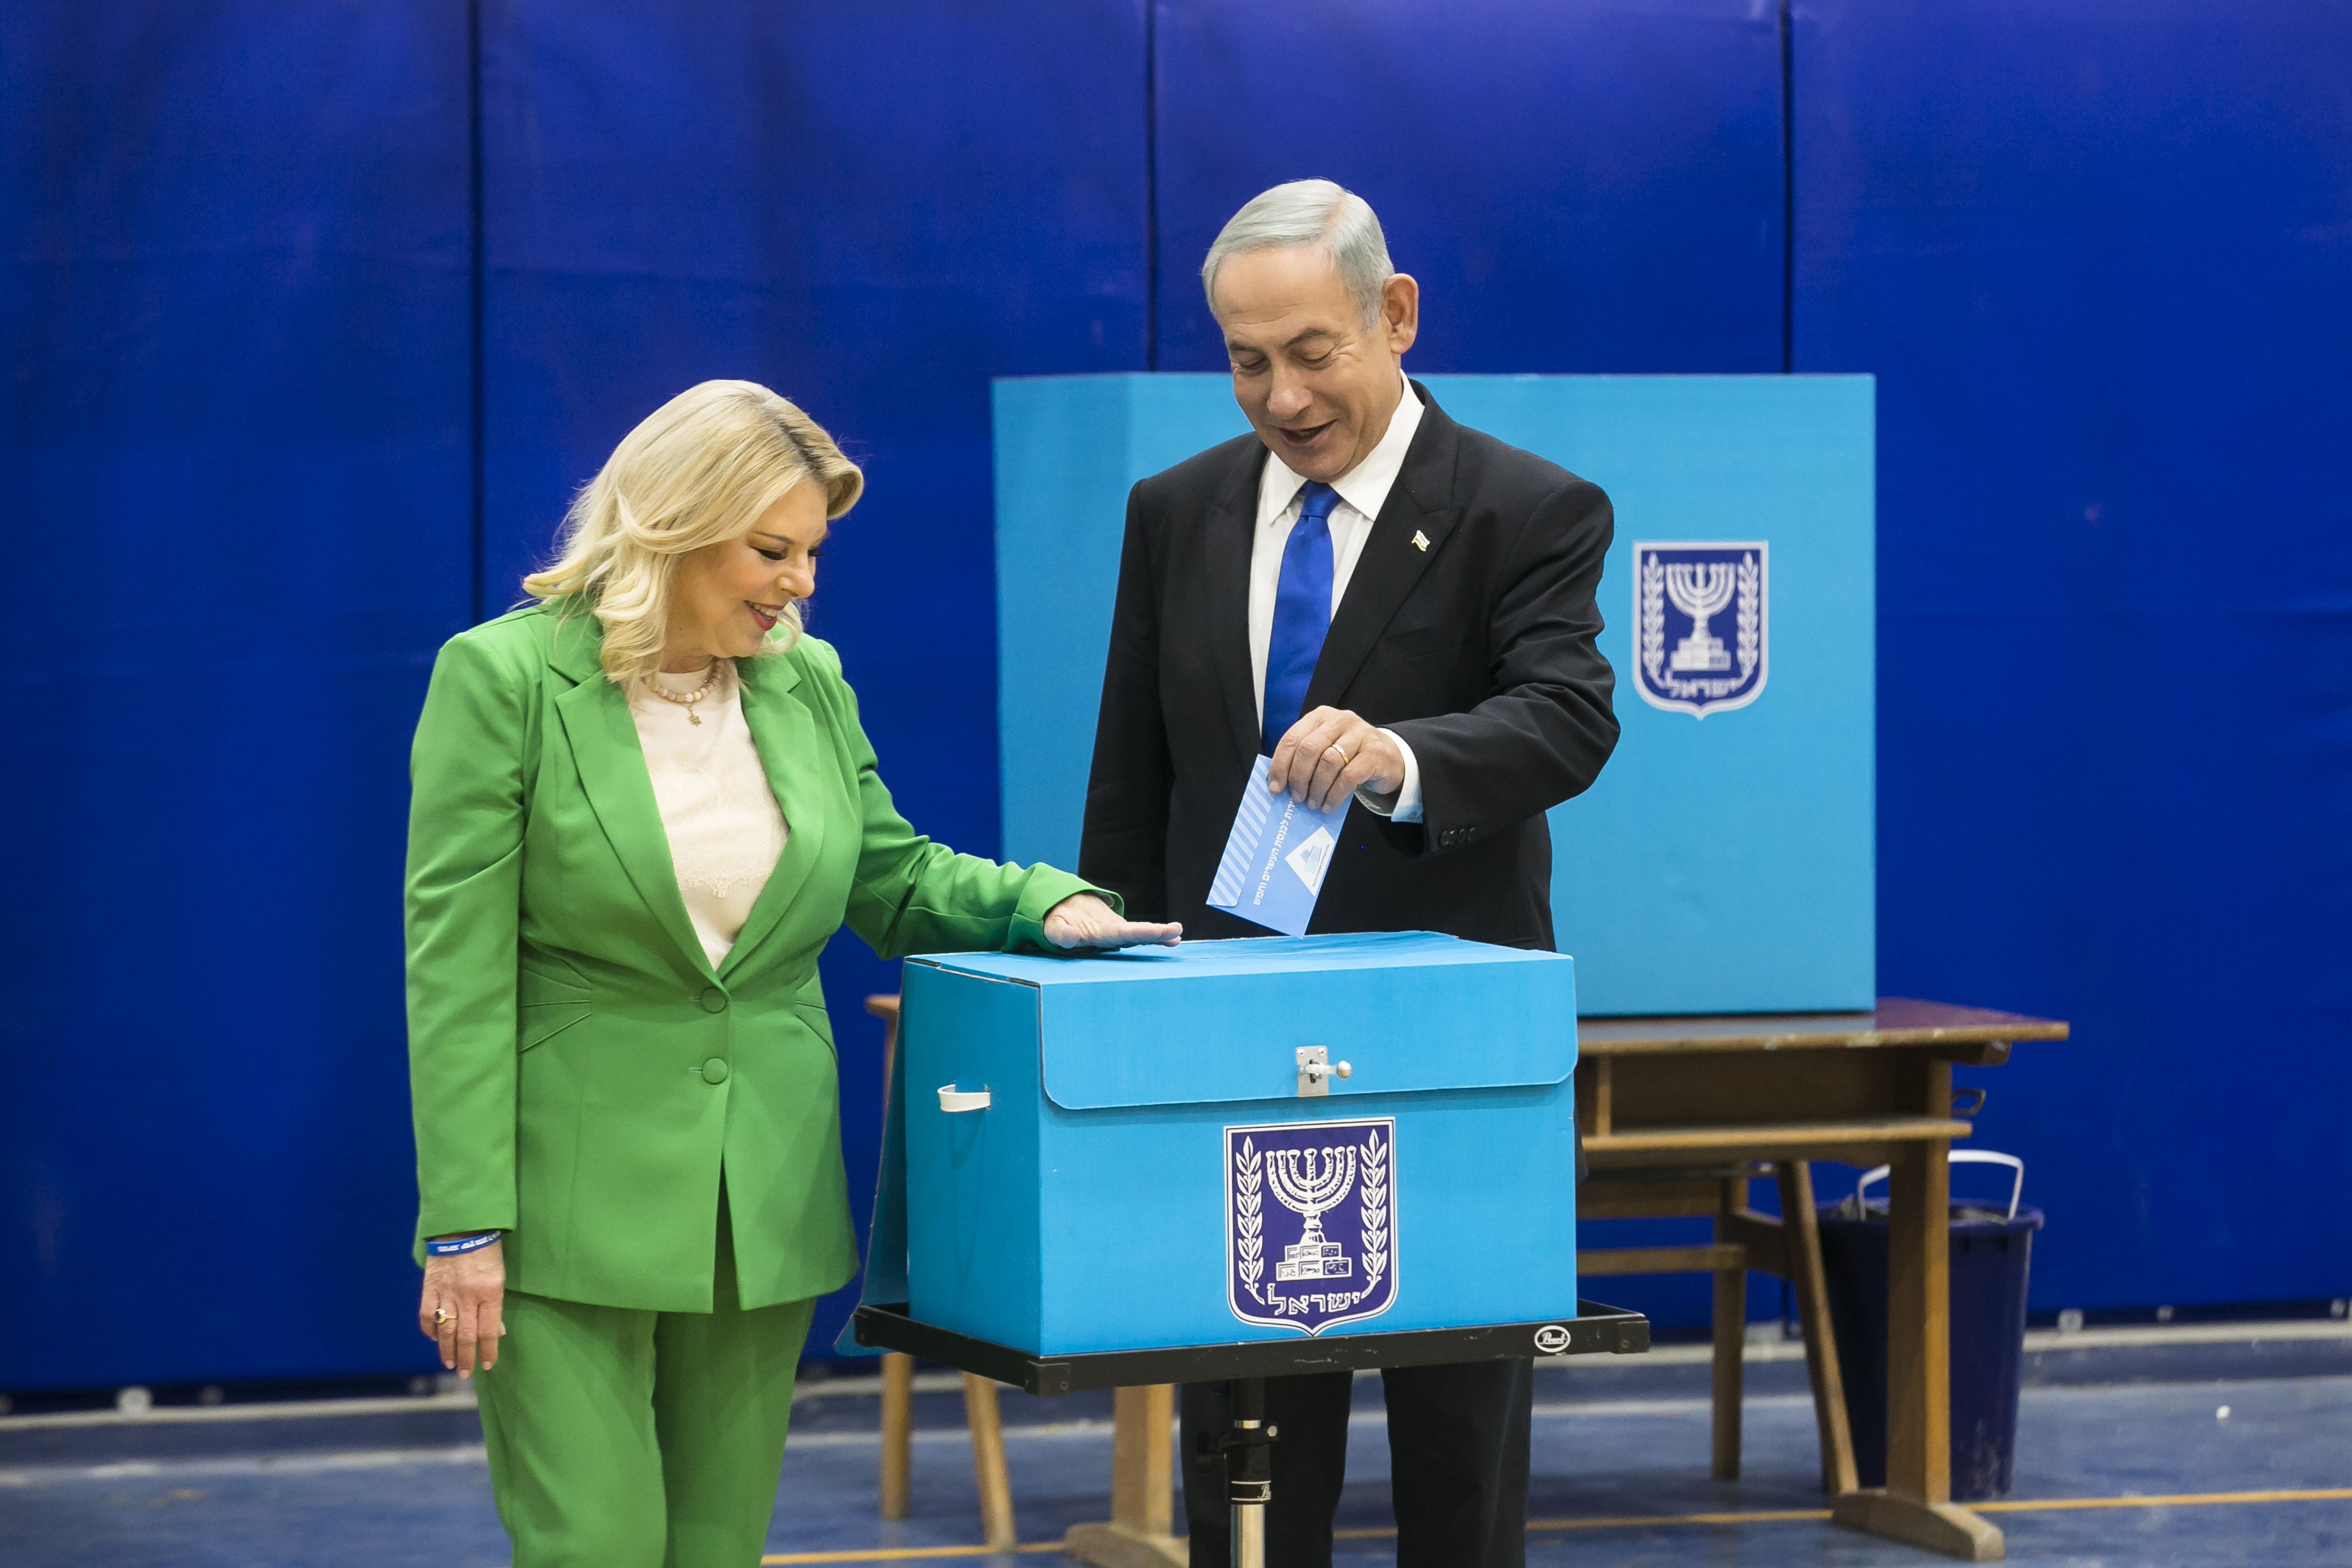 Likud party leader and former Prime Minister Benjamin Netanyahu and his wife Sara Netanyahu cast their vote in the Israeli general election.